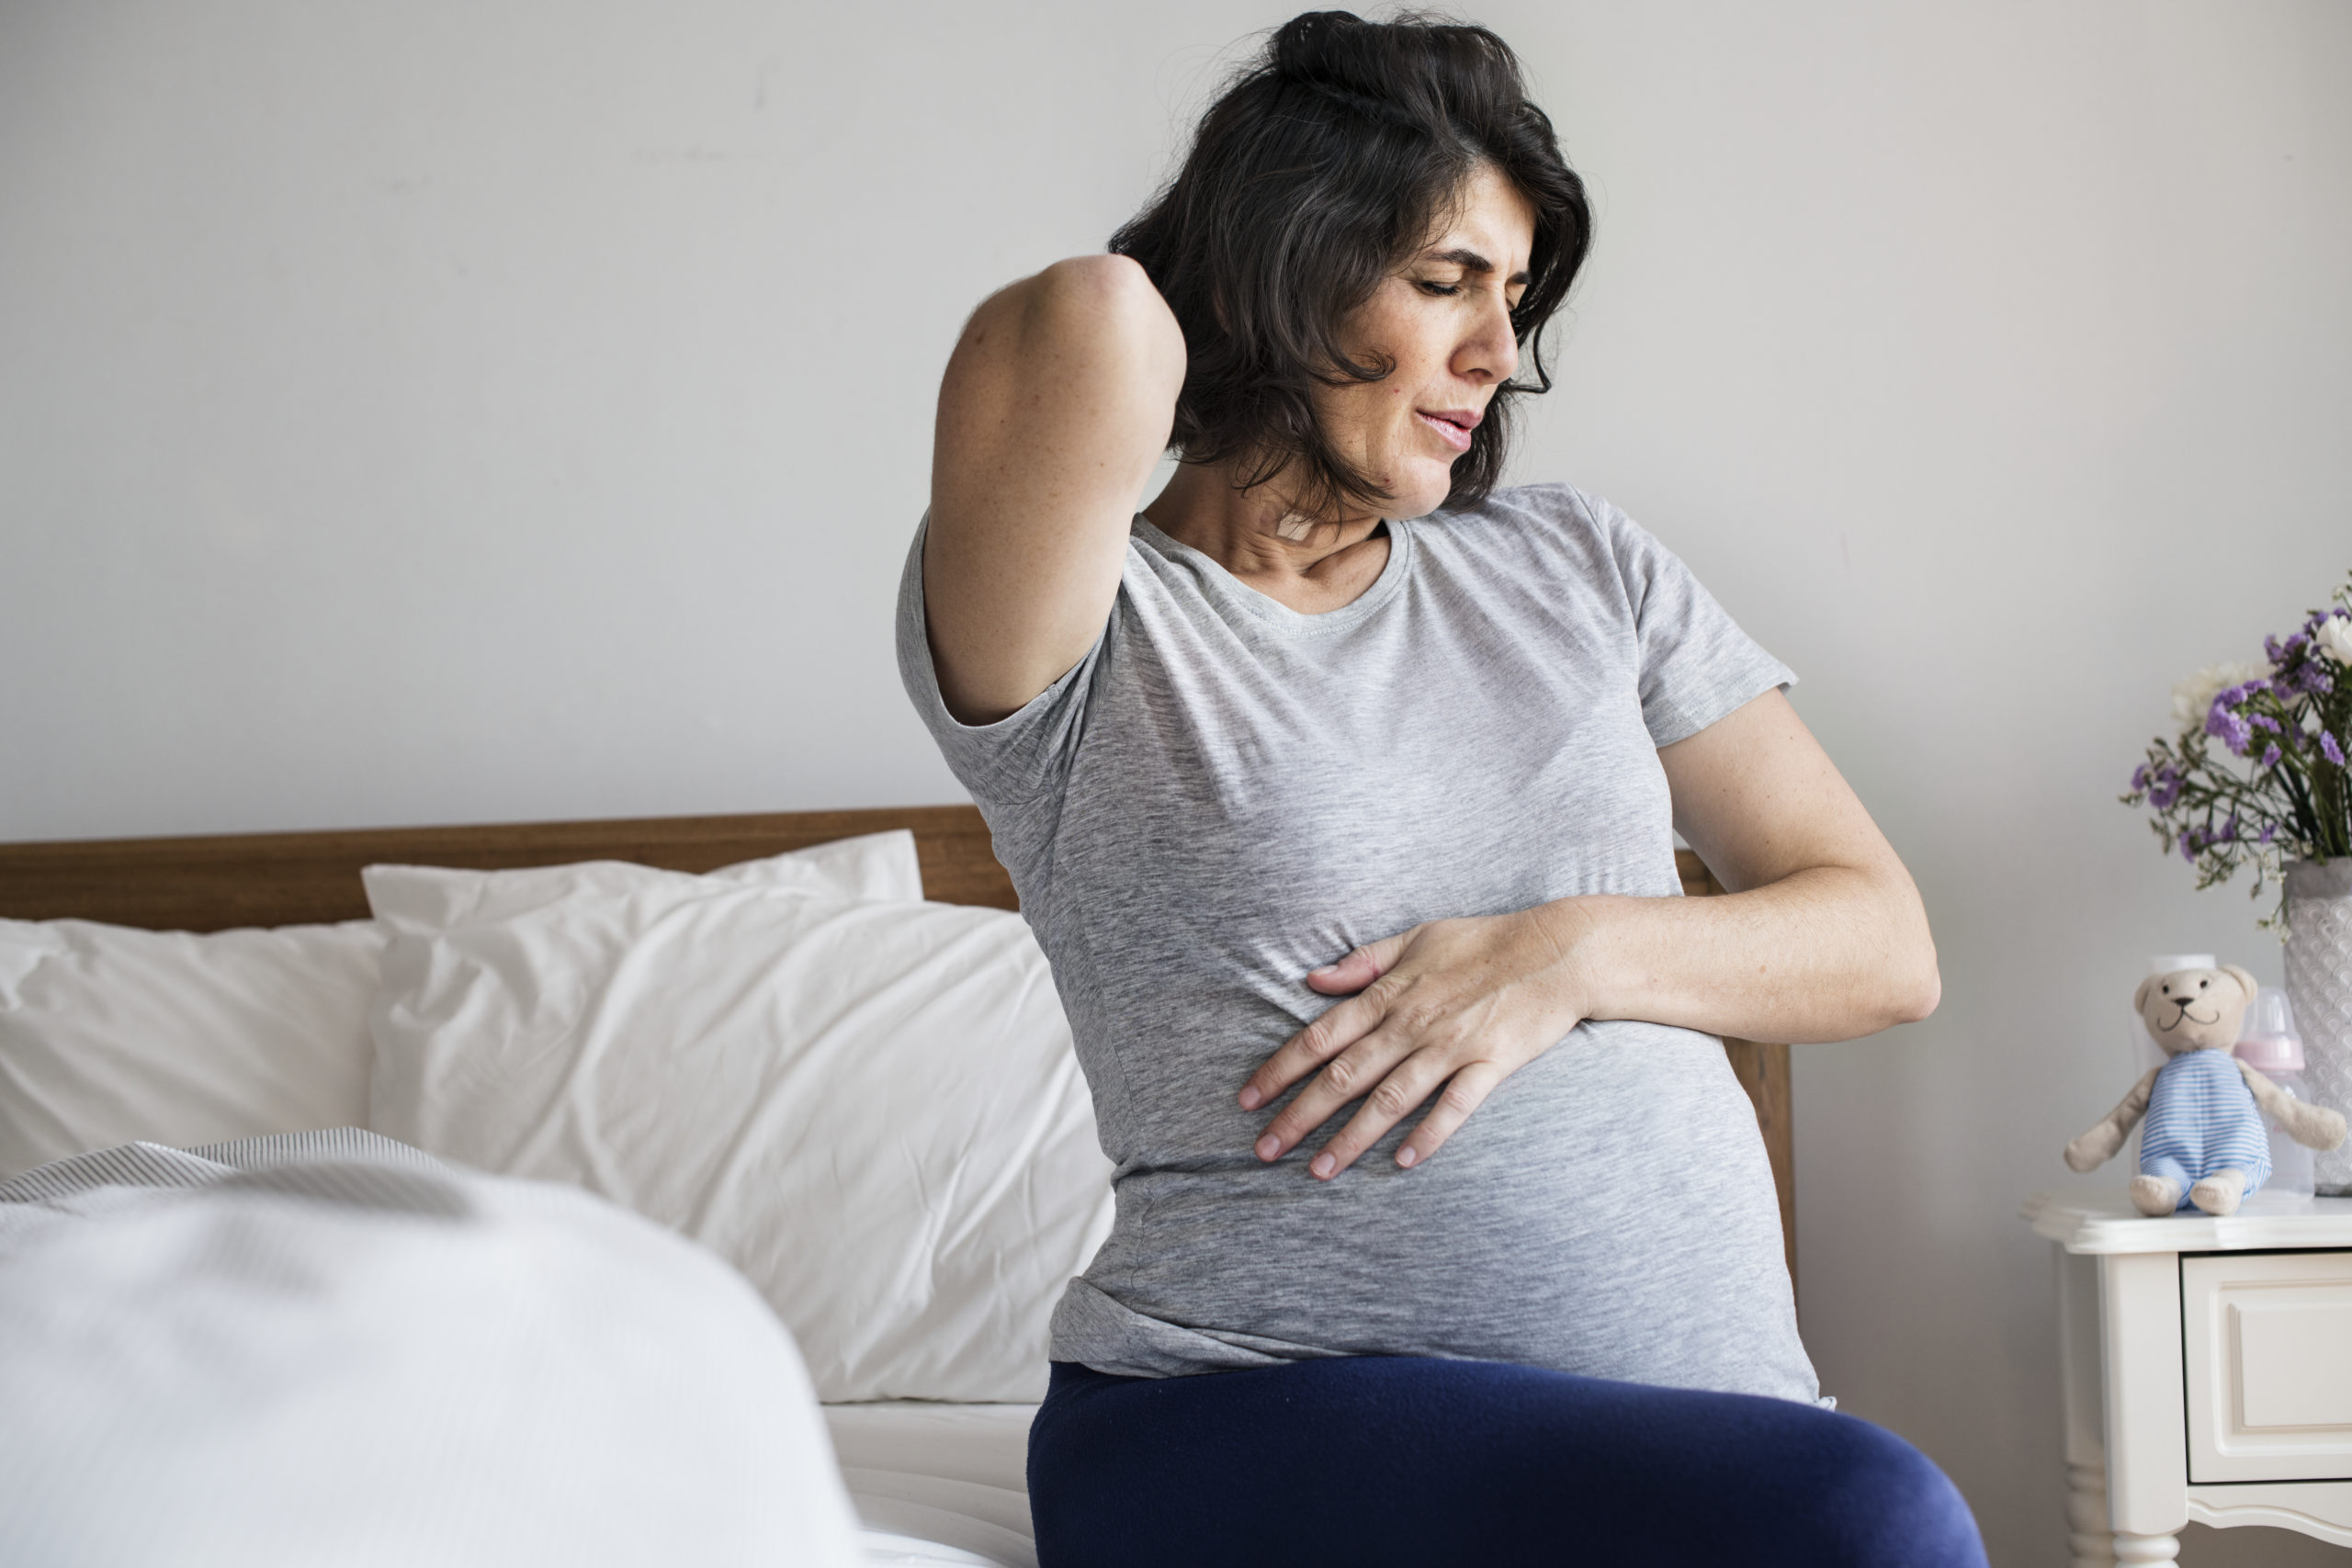 Pain Management in Pregnancy: The Smart Patient's Guide - Pain Management & Injury Relief